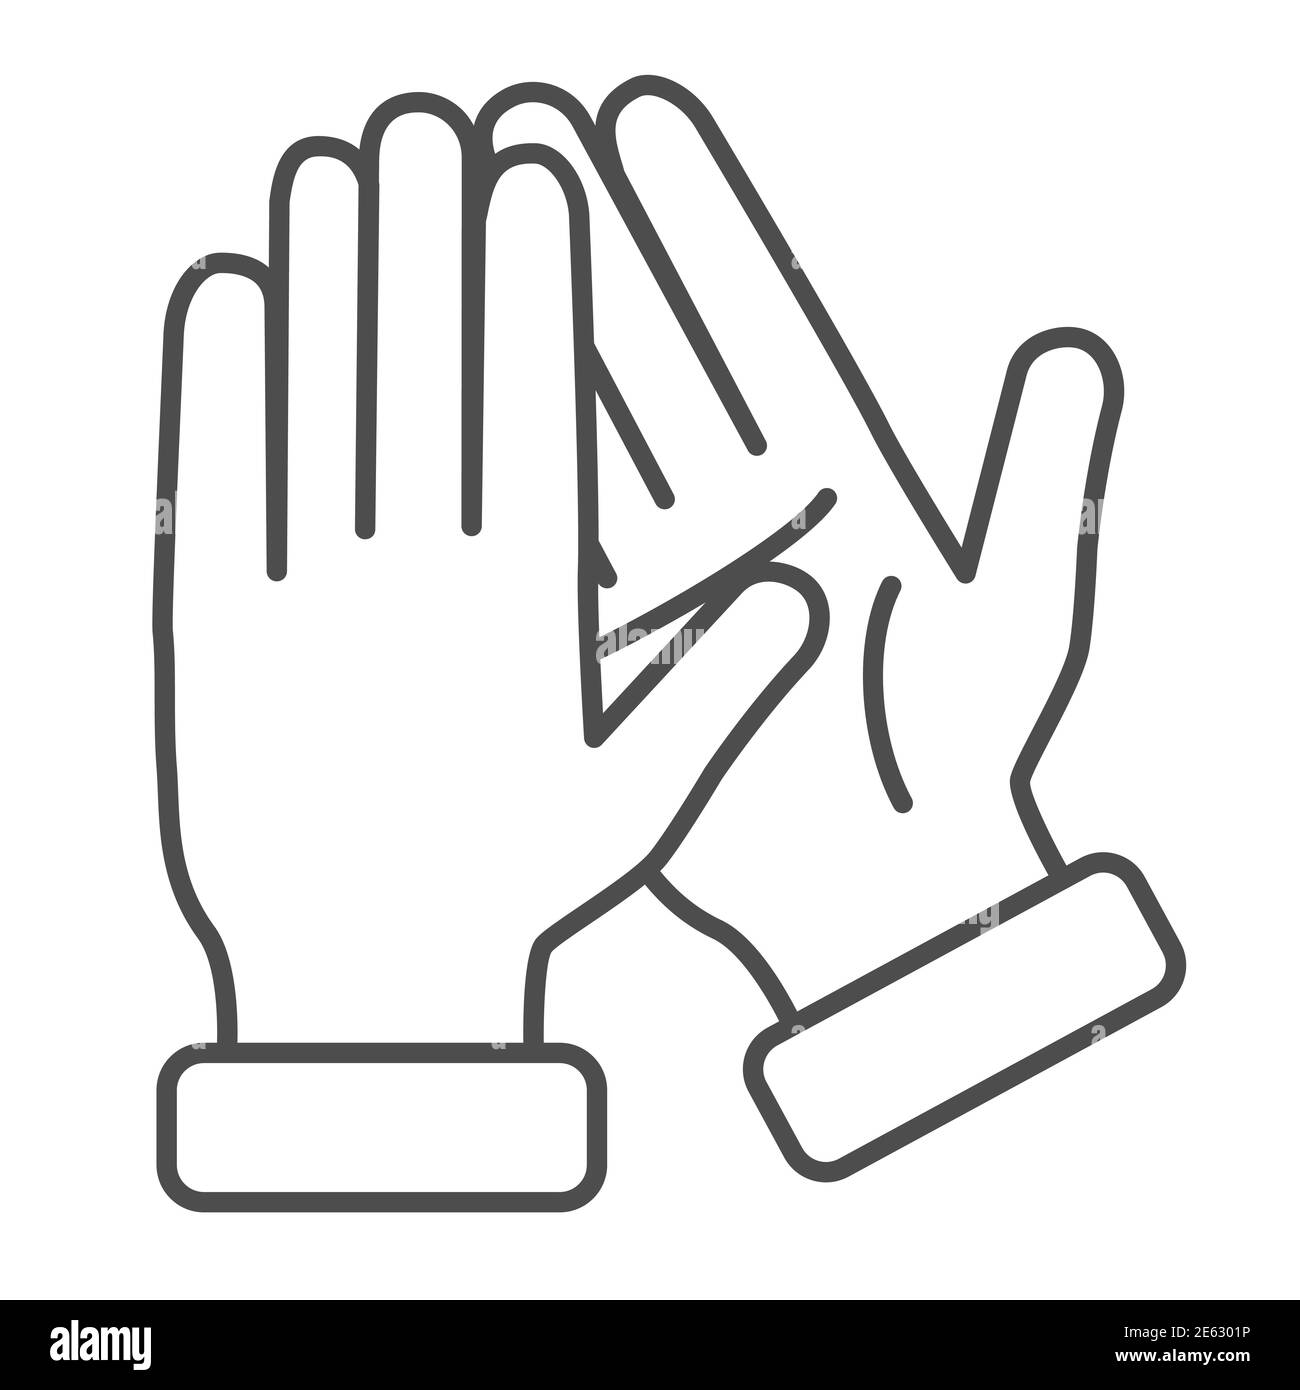 Applause thin line icon, gestures concept, bravo sign on white background, Hands clapping symbol in outline style for mobile concept and web design Stock Vector